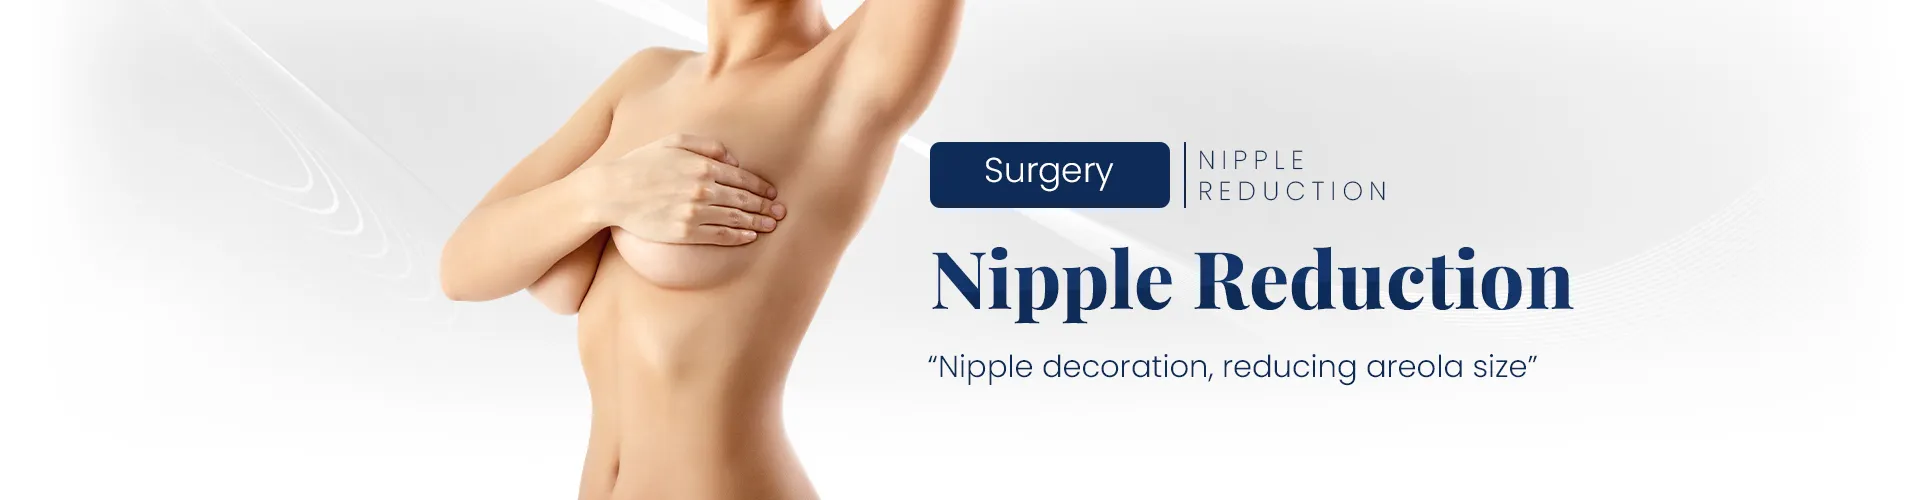 Reducing the size of nipples and areolas | Milada Plastic Surgery Hospital 